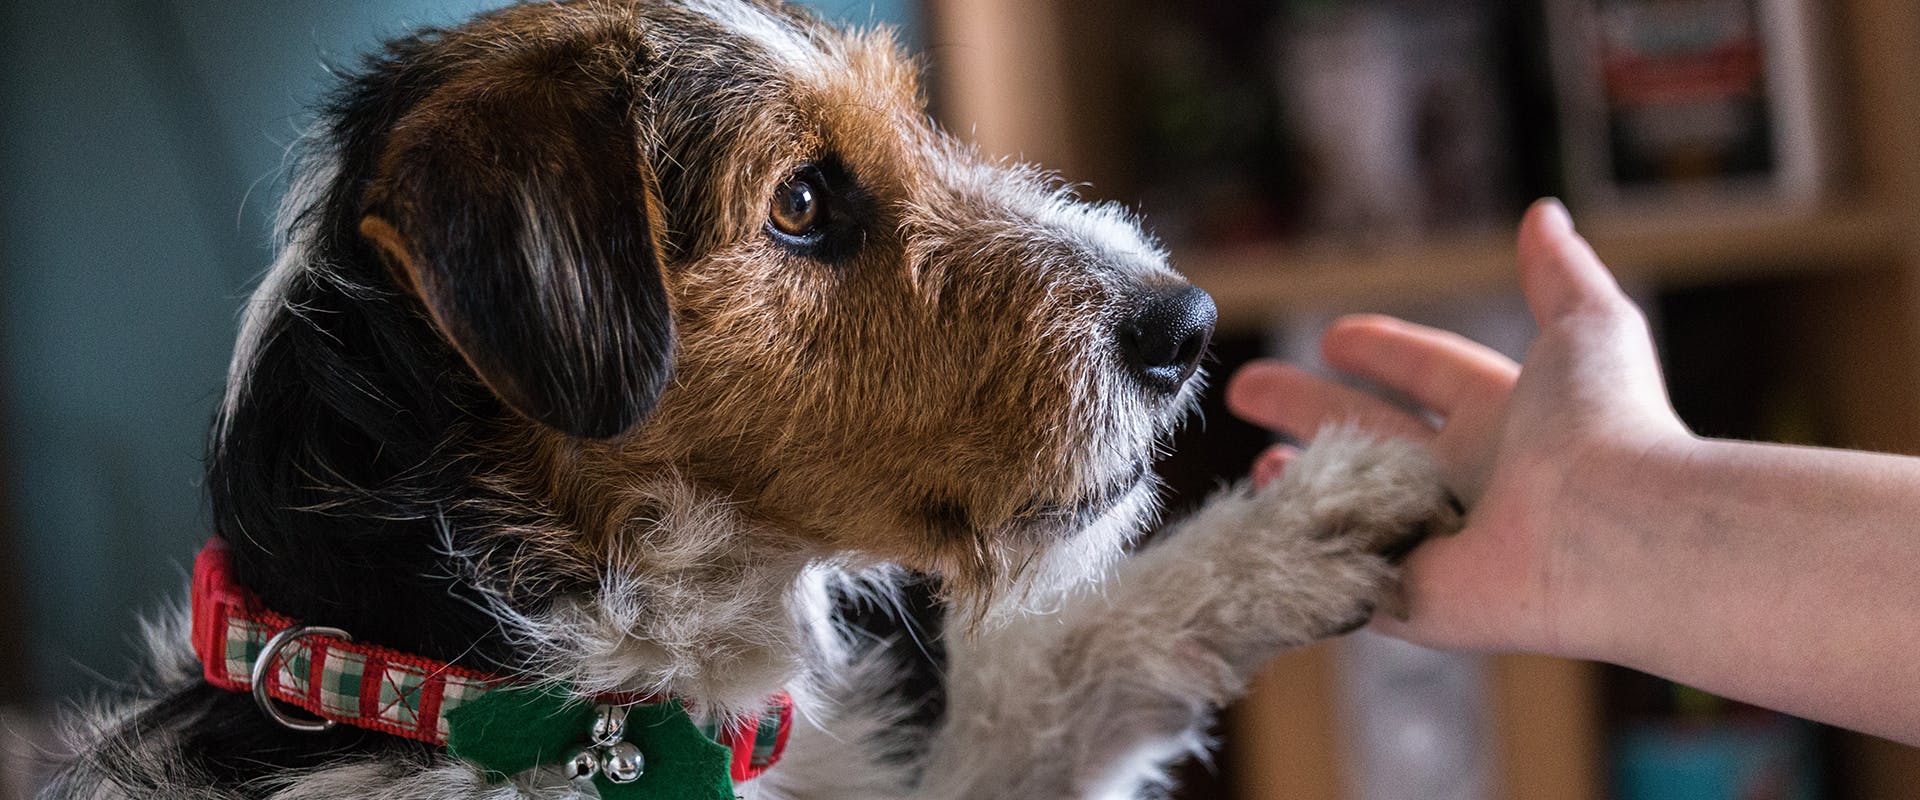 A dog wearing a Christmas dog collar giving a person his paw